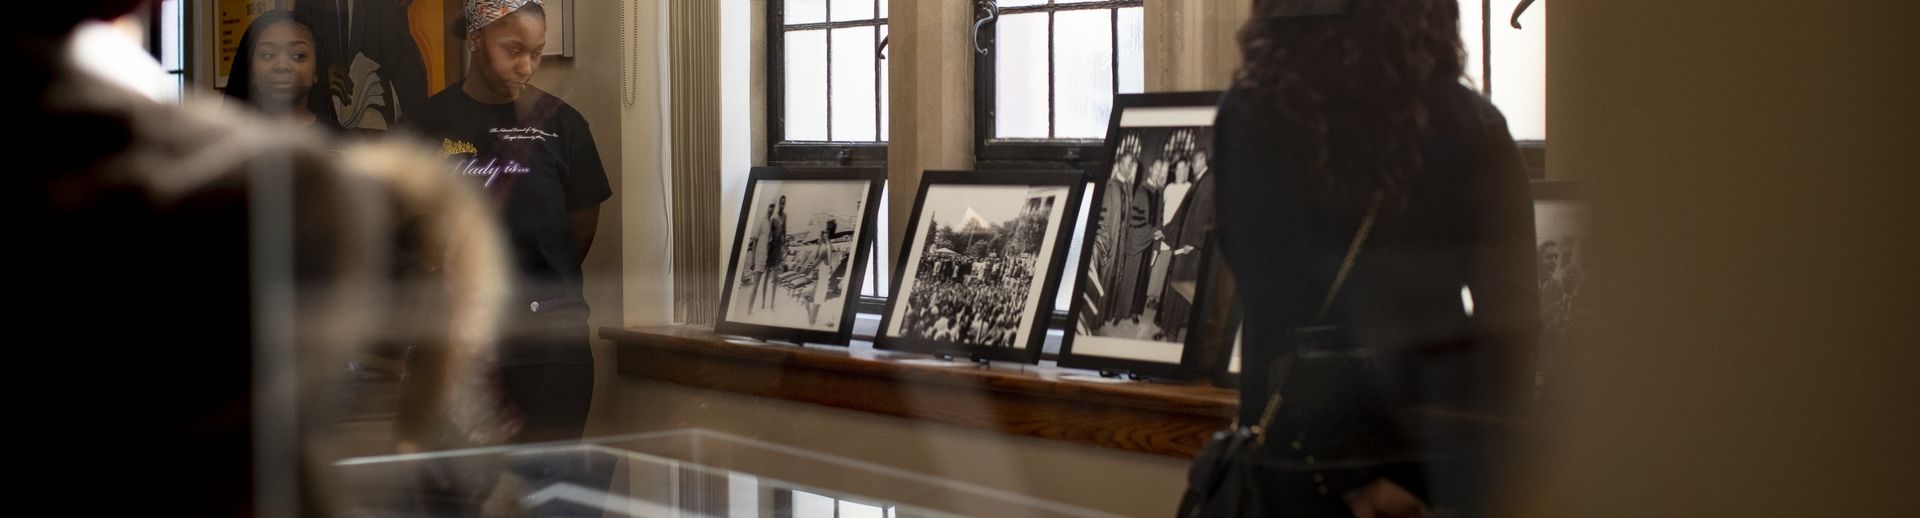 Students view a collection at the Charles Blockson Collection on campus.